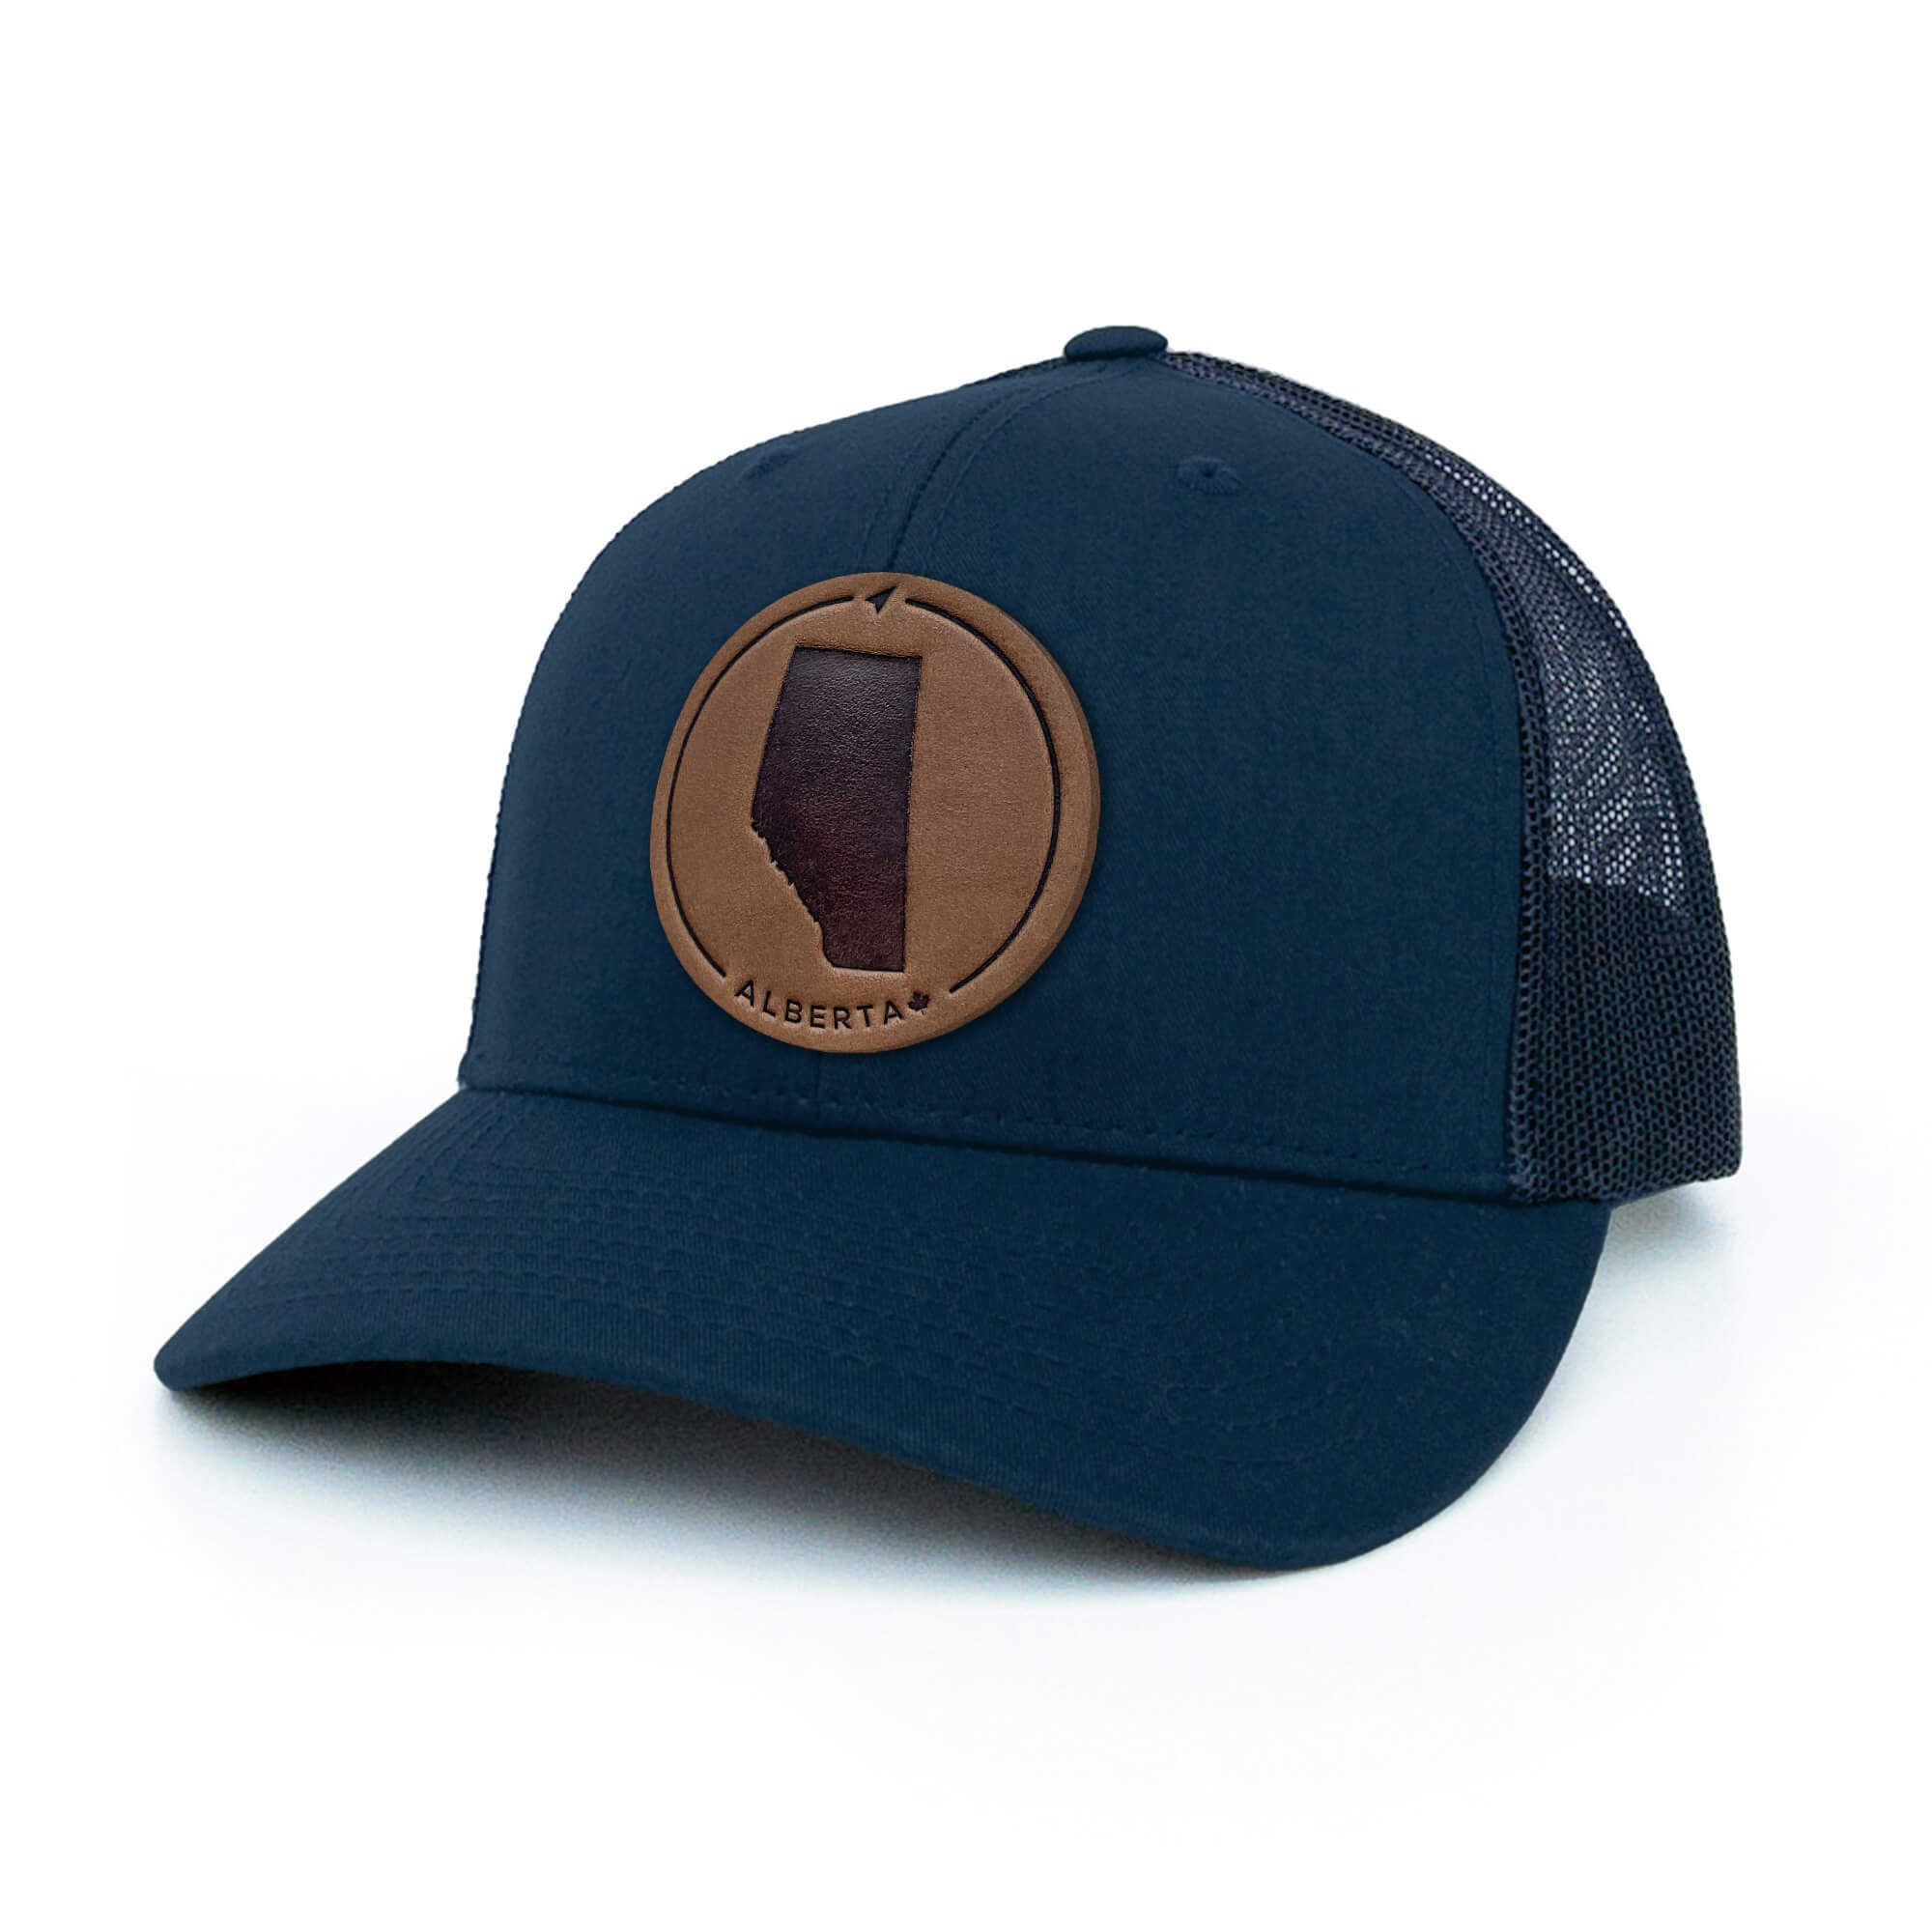 Navy trucker hat with full-grain leather patch of Alberta | BLACK-002-005, CHARC-002-005, NAVY-002-005, HGREY-002-005, MOSS-002-005, BROWN-002-005